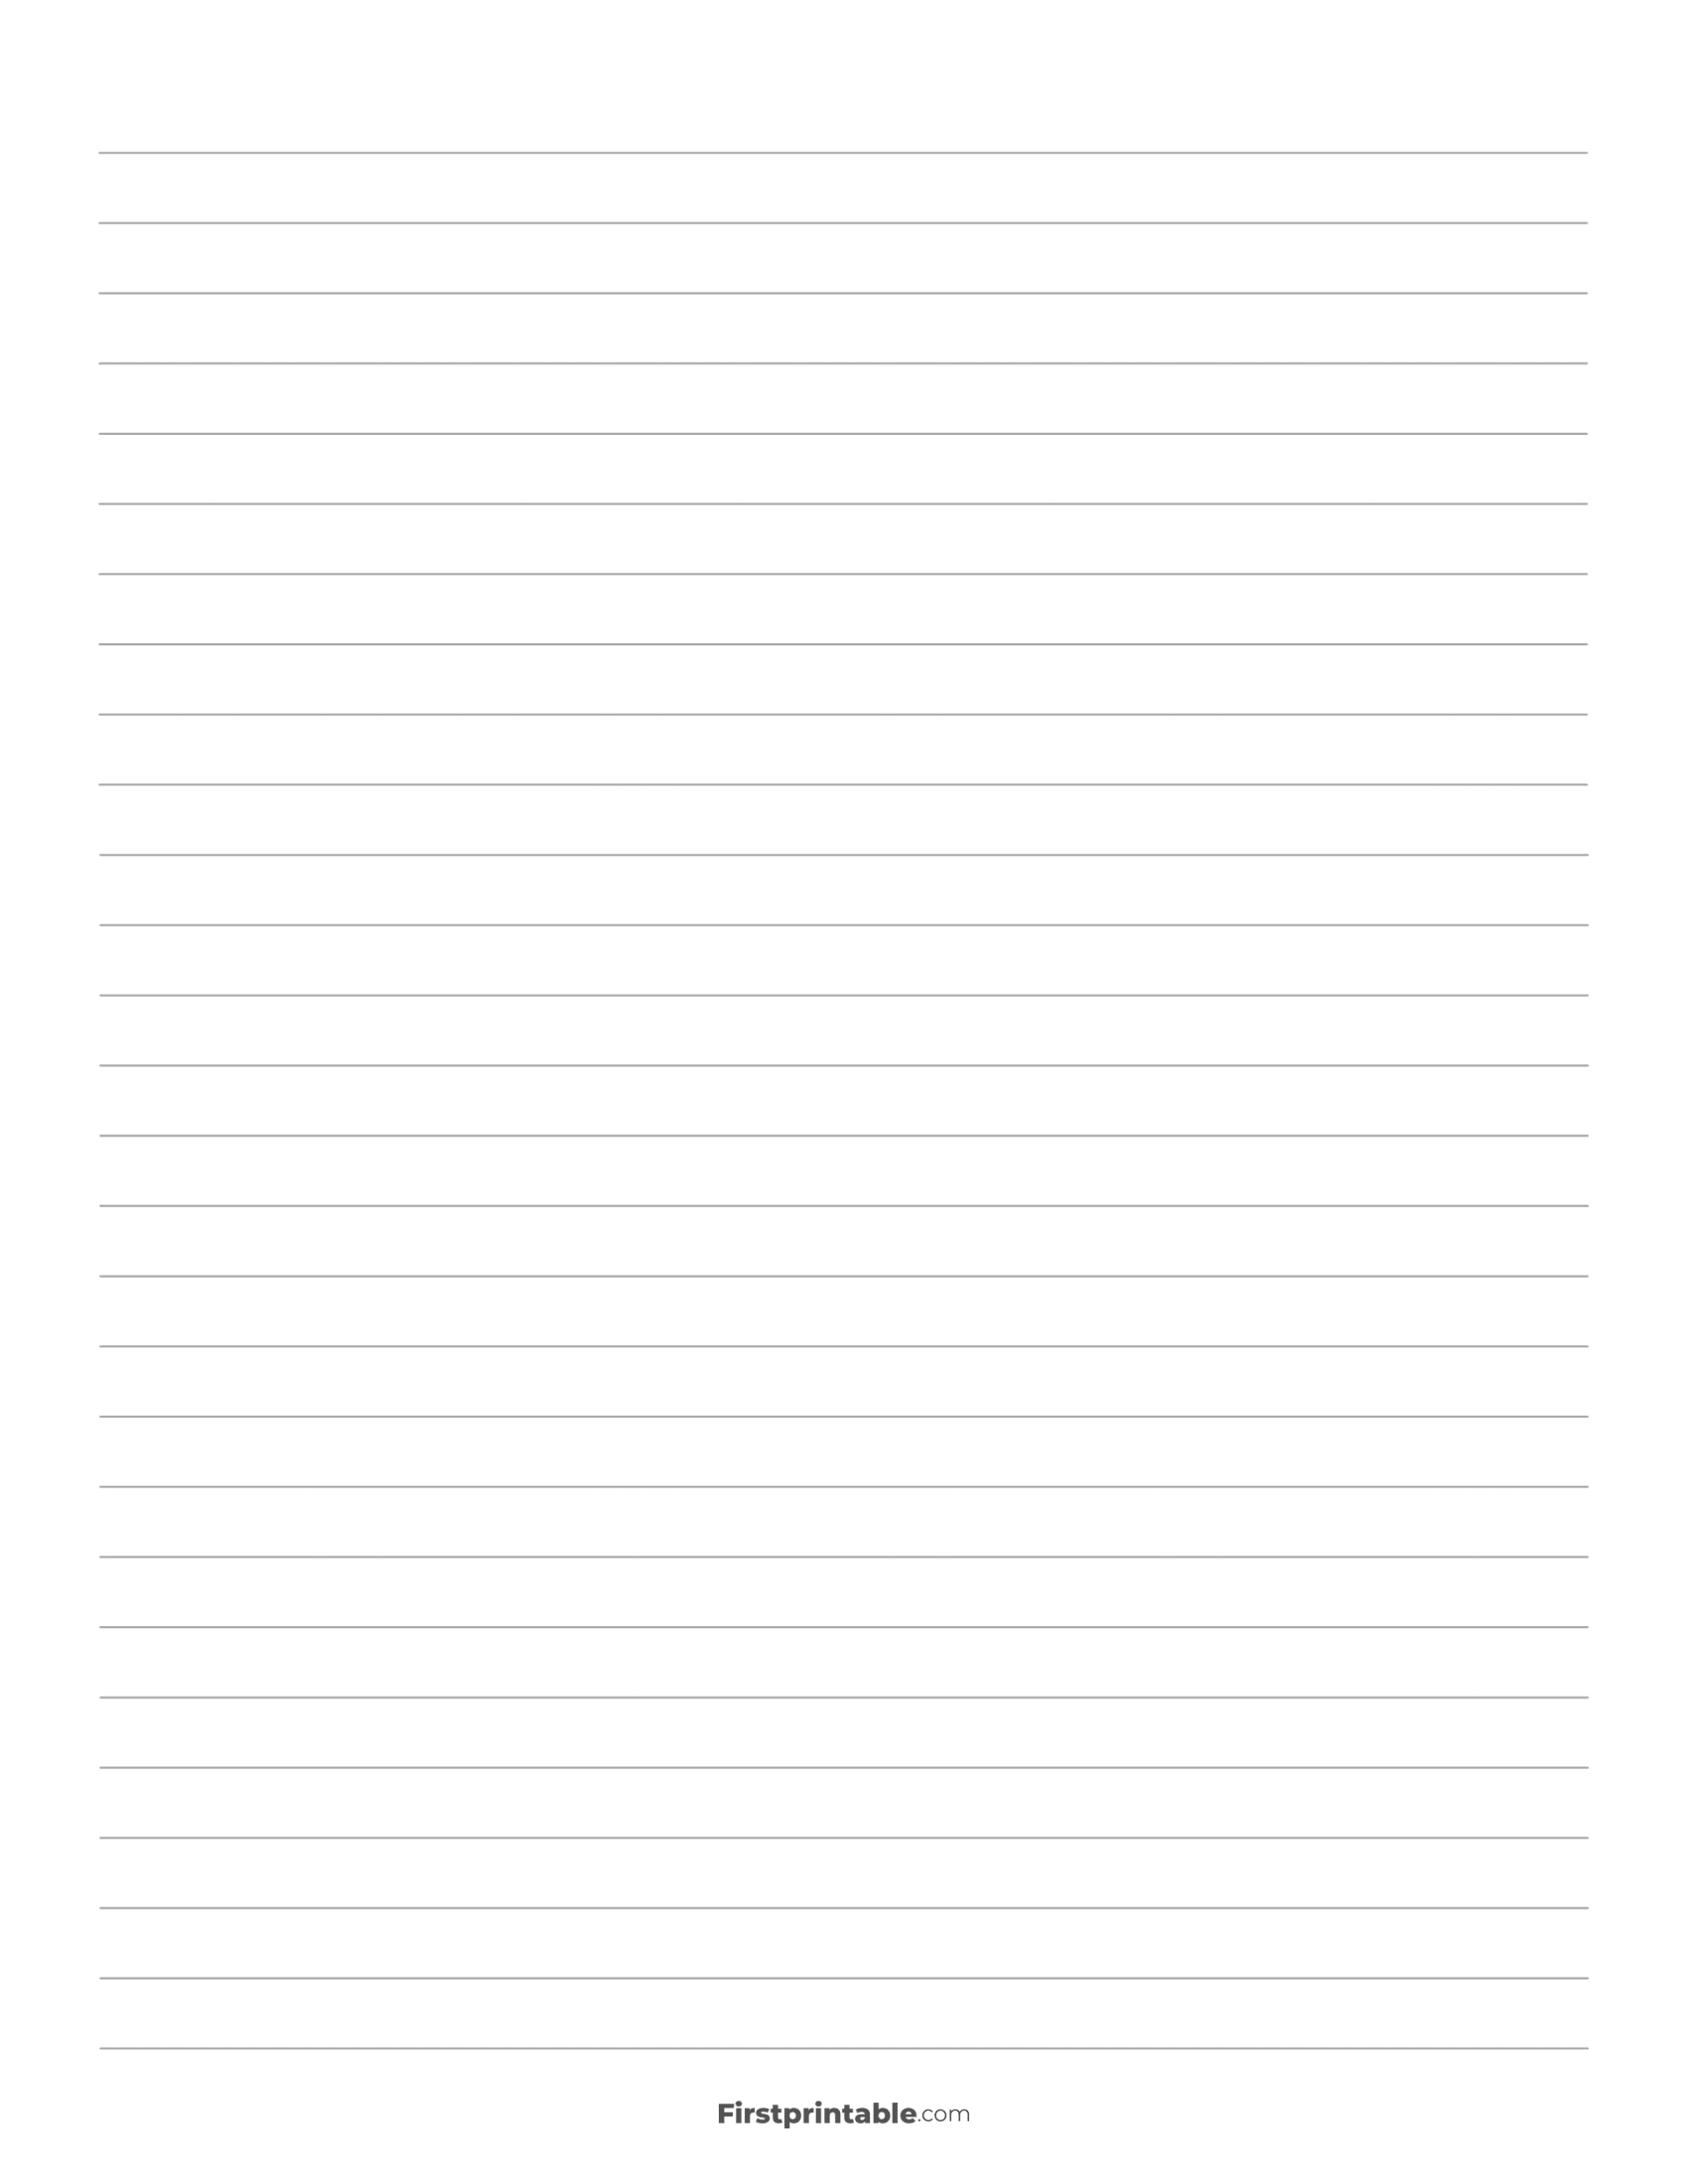 Printable Lined Paper Template - Wide Ruled